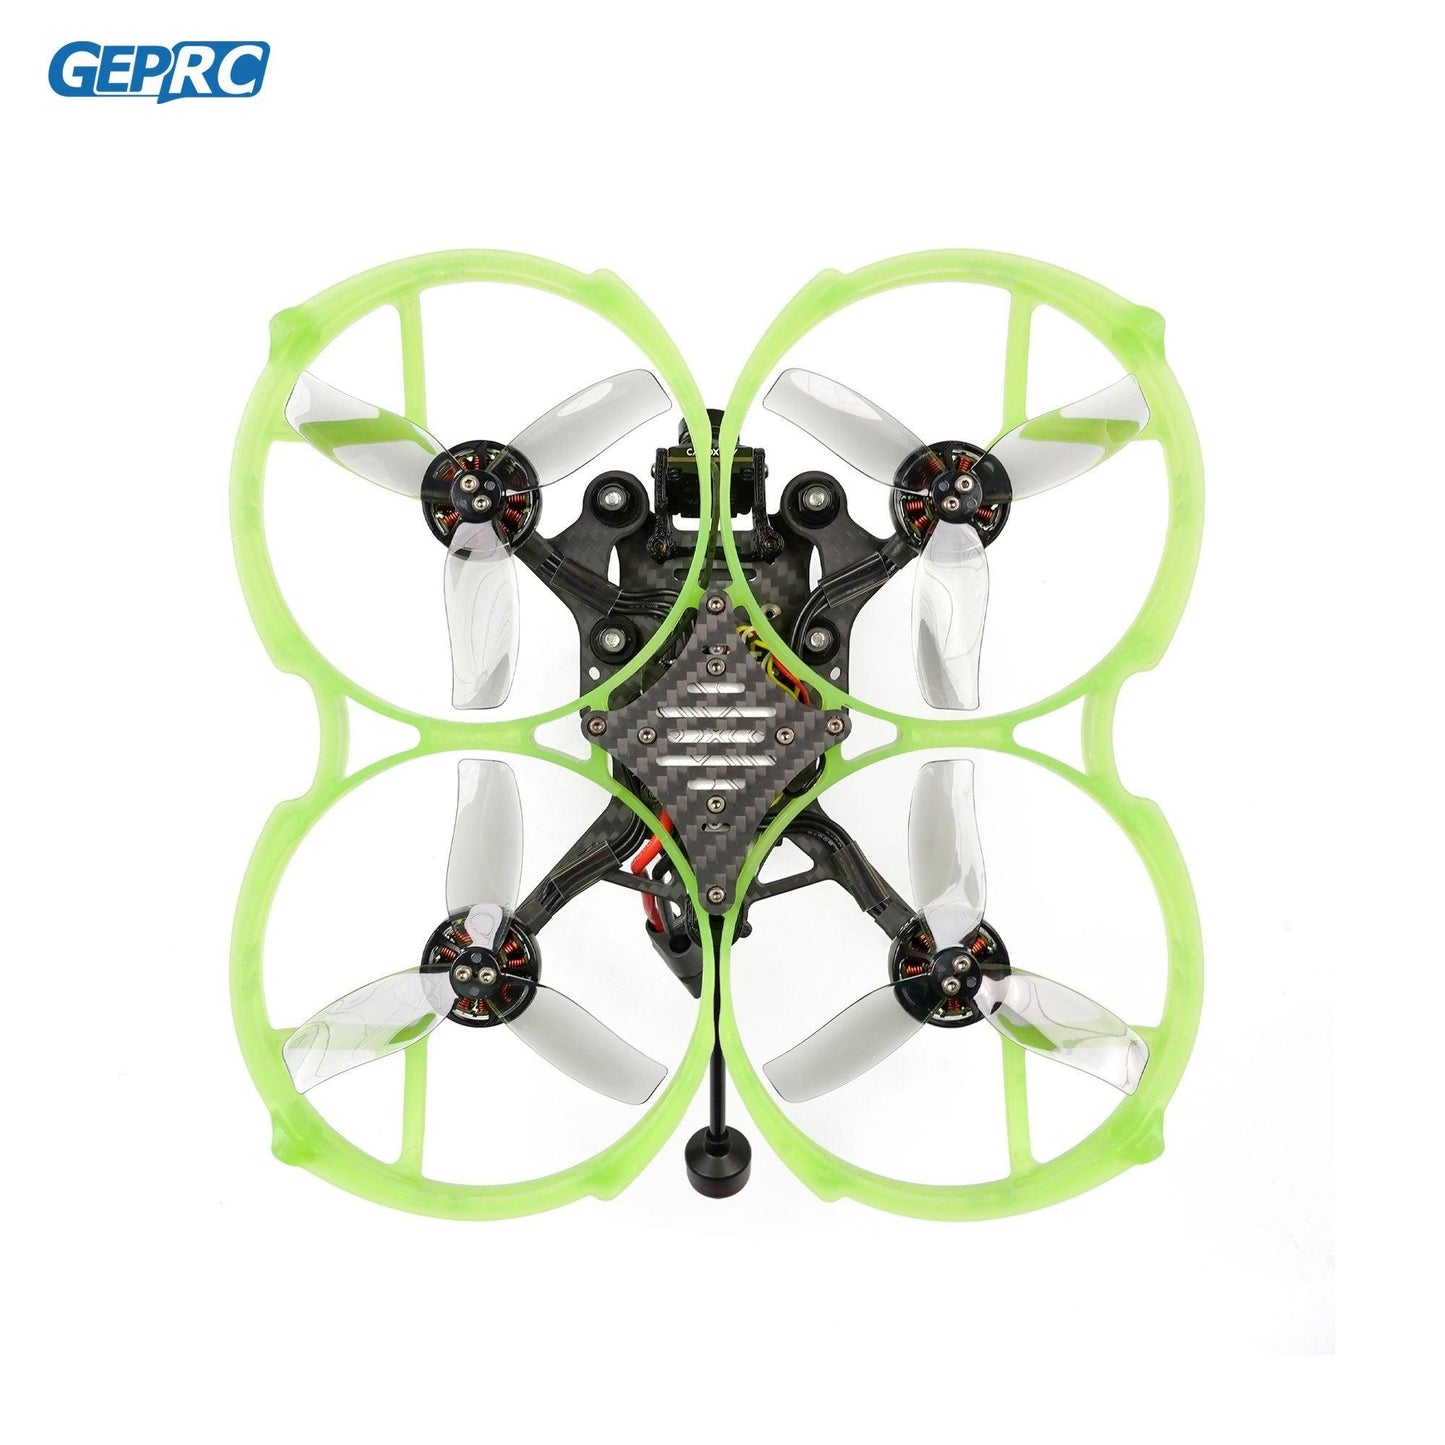 GEPRC CineLog 35 FPV Drone - HD VISTA Nebula Pro 6S Cinewhoop F722-45A SPEEDX2 Altitude Durable RC FPV Quadcopter Freestyle Drone - RCDrone